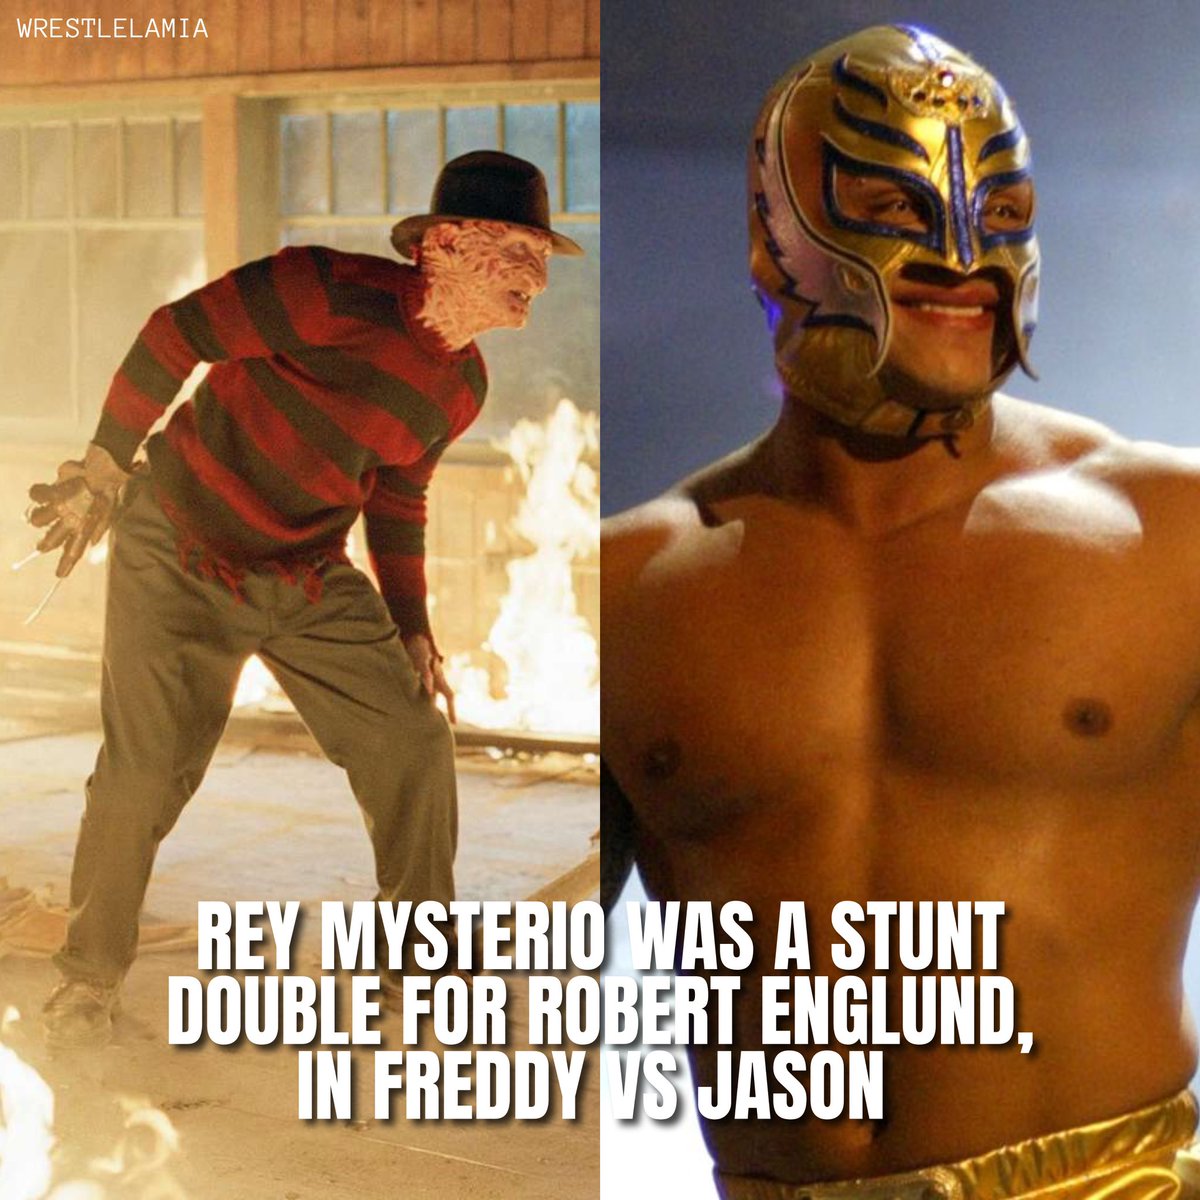 Rey Mysterio was a stunt double for Robert Englund (Freddy Kruger) in the movie Freddy vs Jason (2003).

That blows my mind.